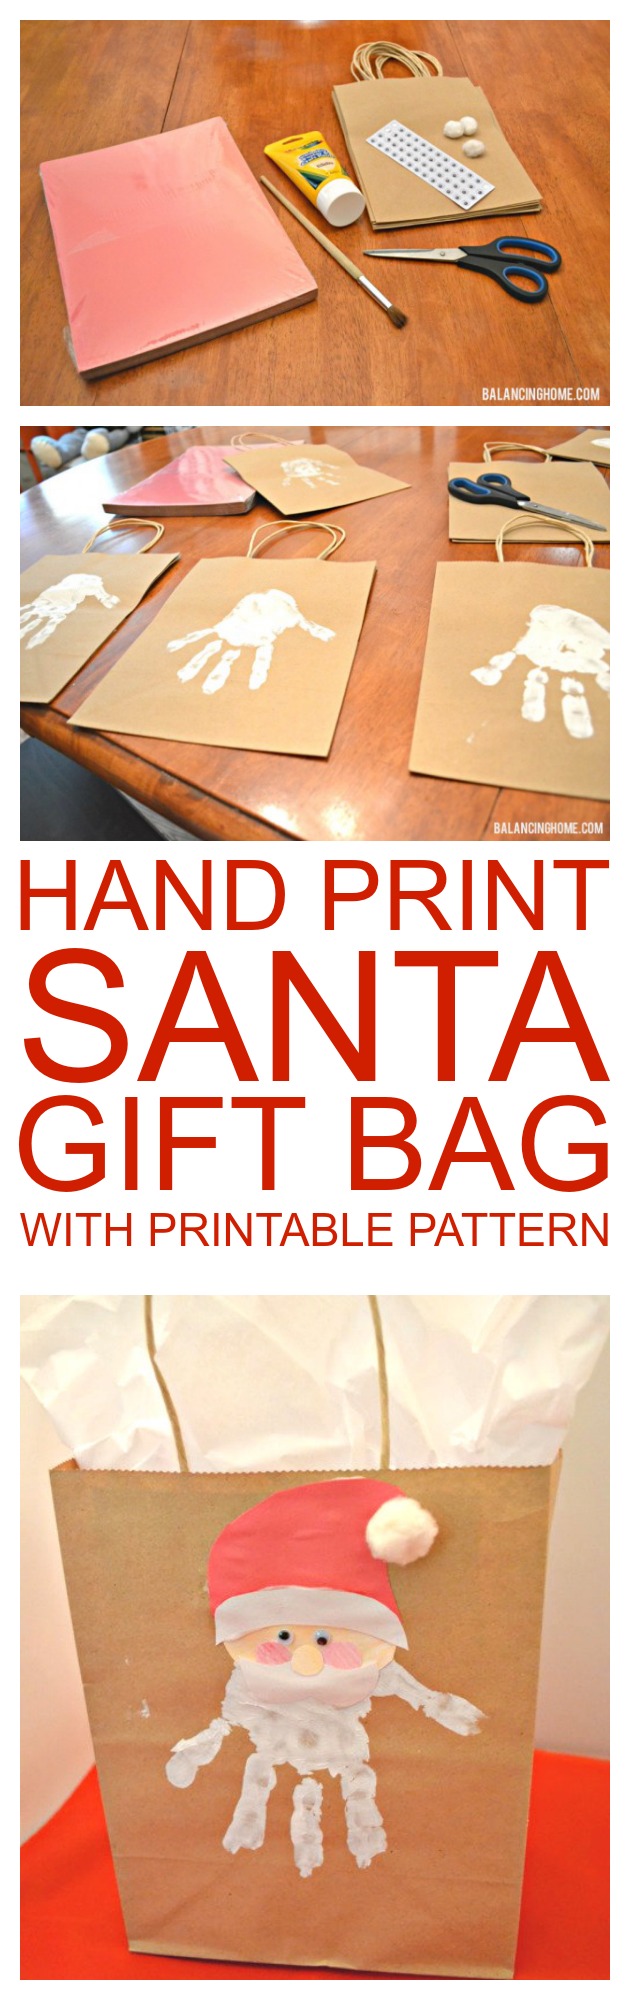 Hand print Santa gift bag with printable pattern. Perfect for wrapping up a teacher gift or grandparent's present.